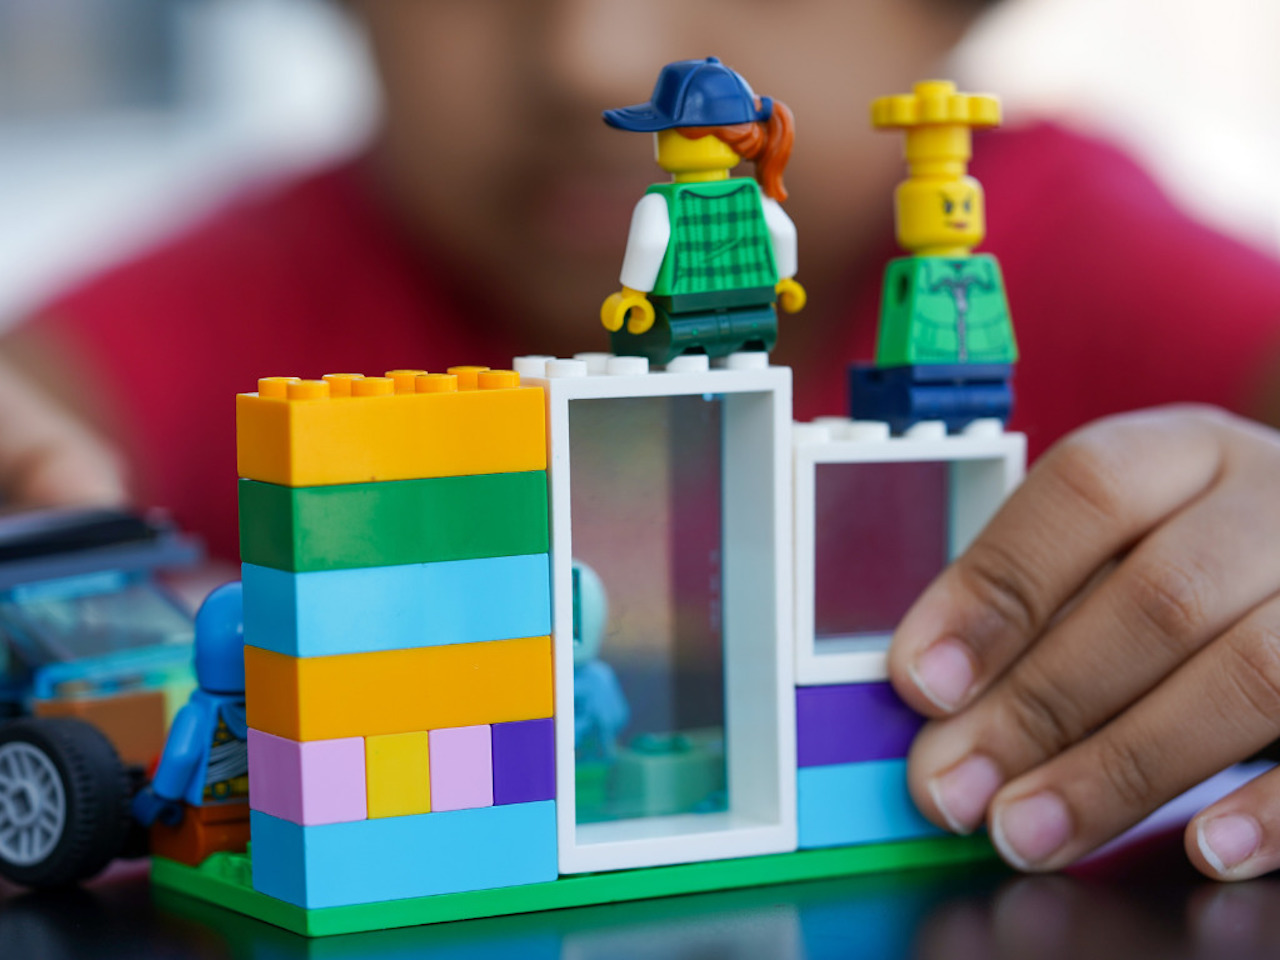 Lego Going Green With Its $1B+ Carbon-Neutral Toy Factory in Virginia